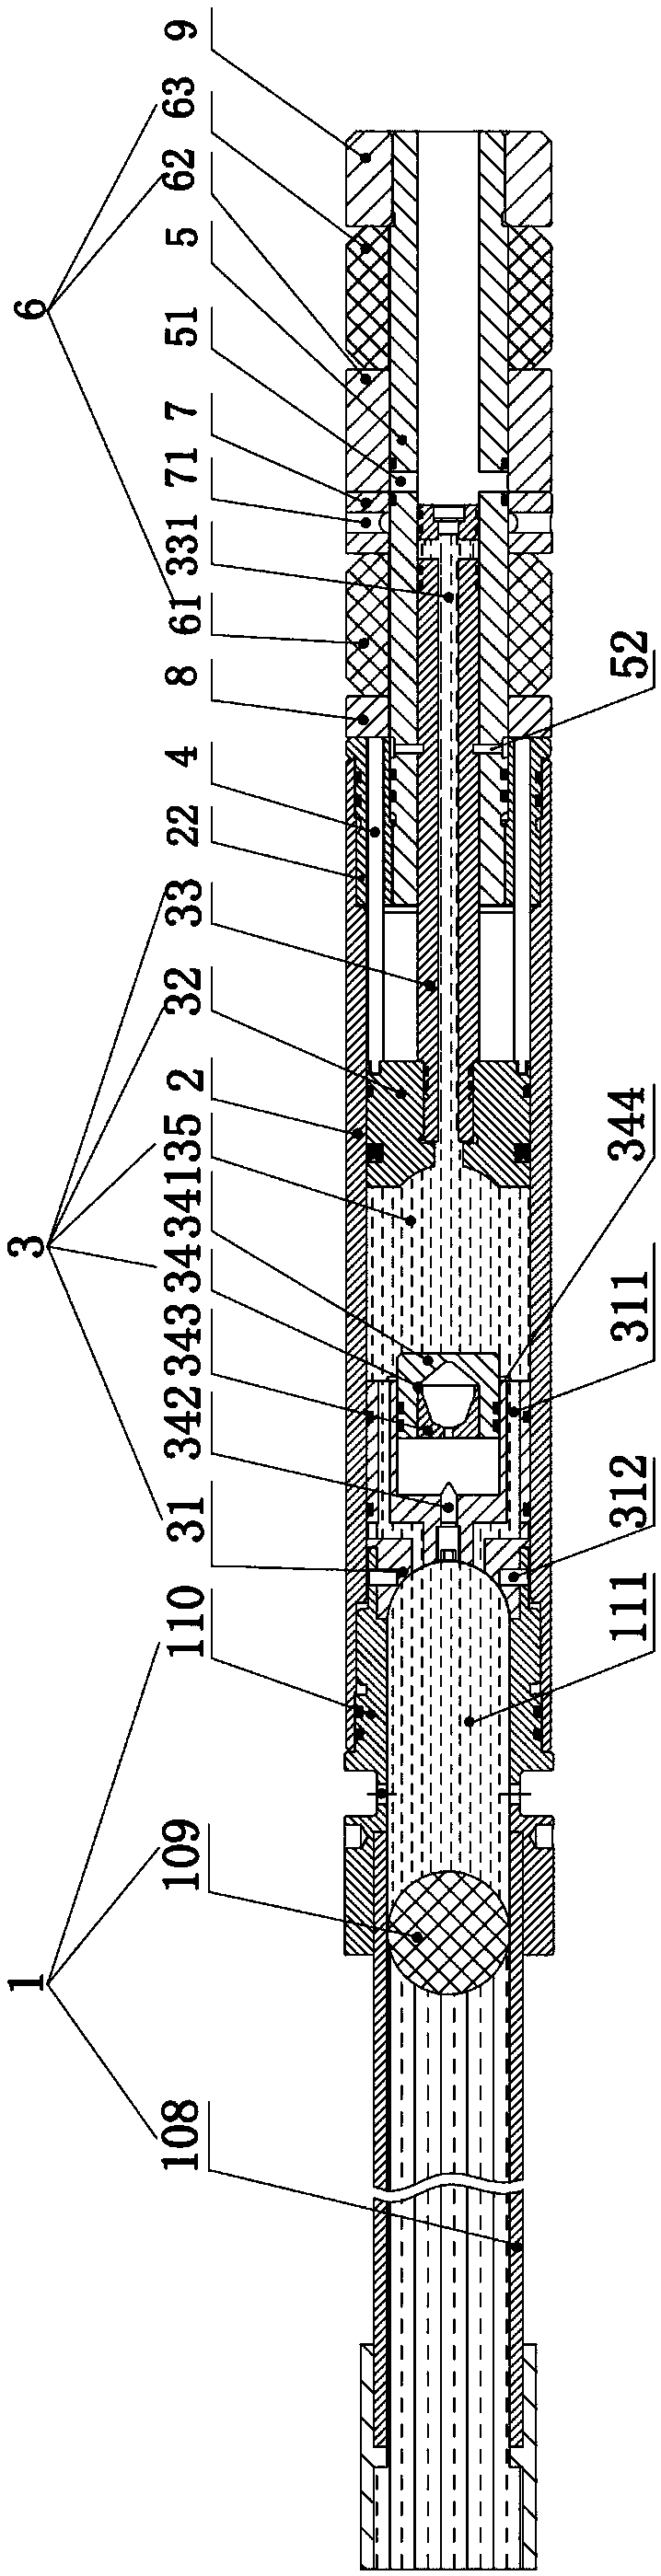 Liquid explosive injection and detonation device for explosion fracturing of oil and gas reservoir